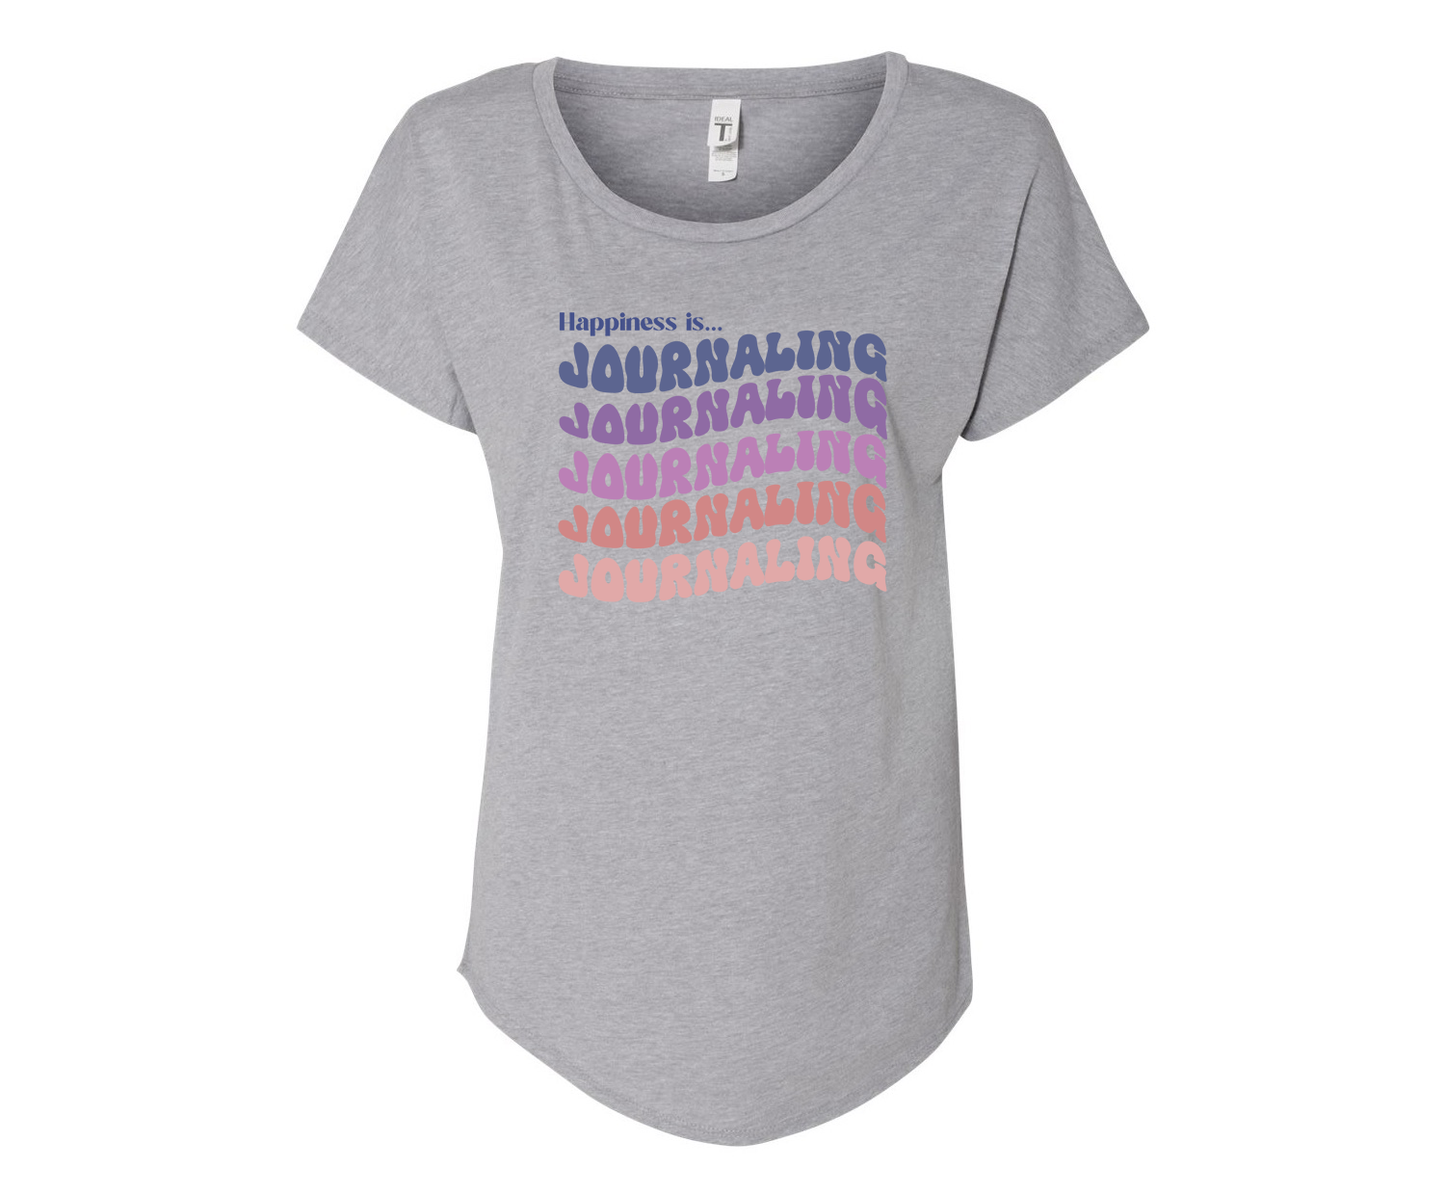 Happiness is Journaling Ladies Tee Shirt - In White & Grey